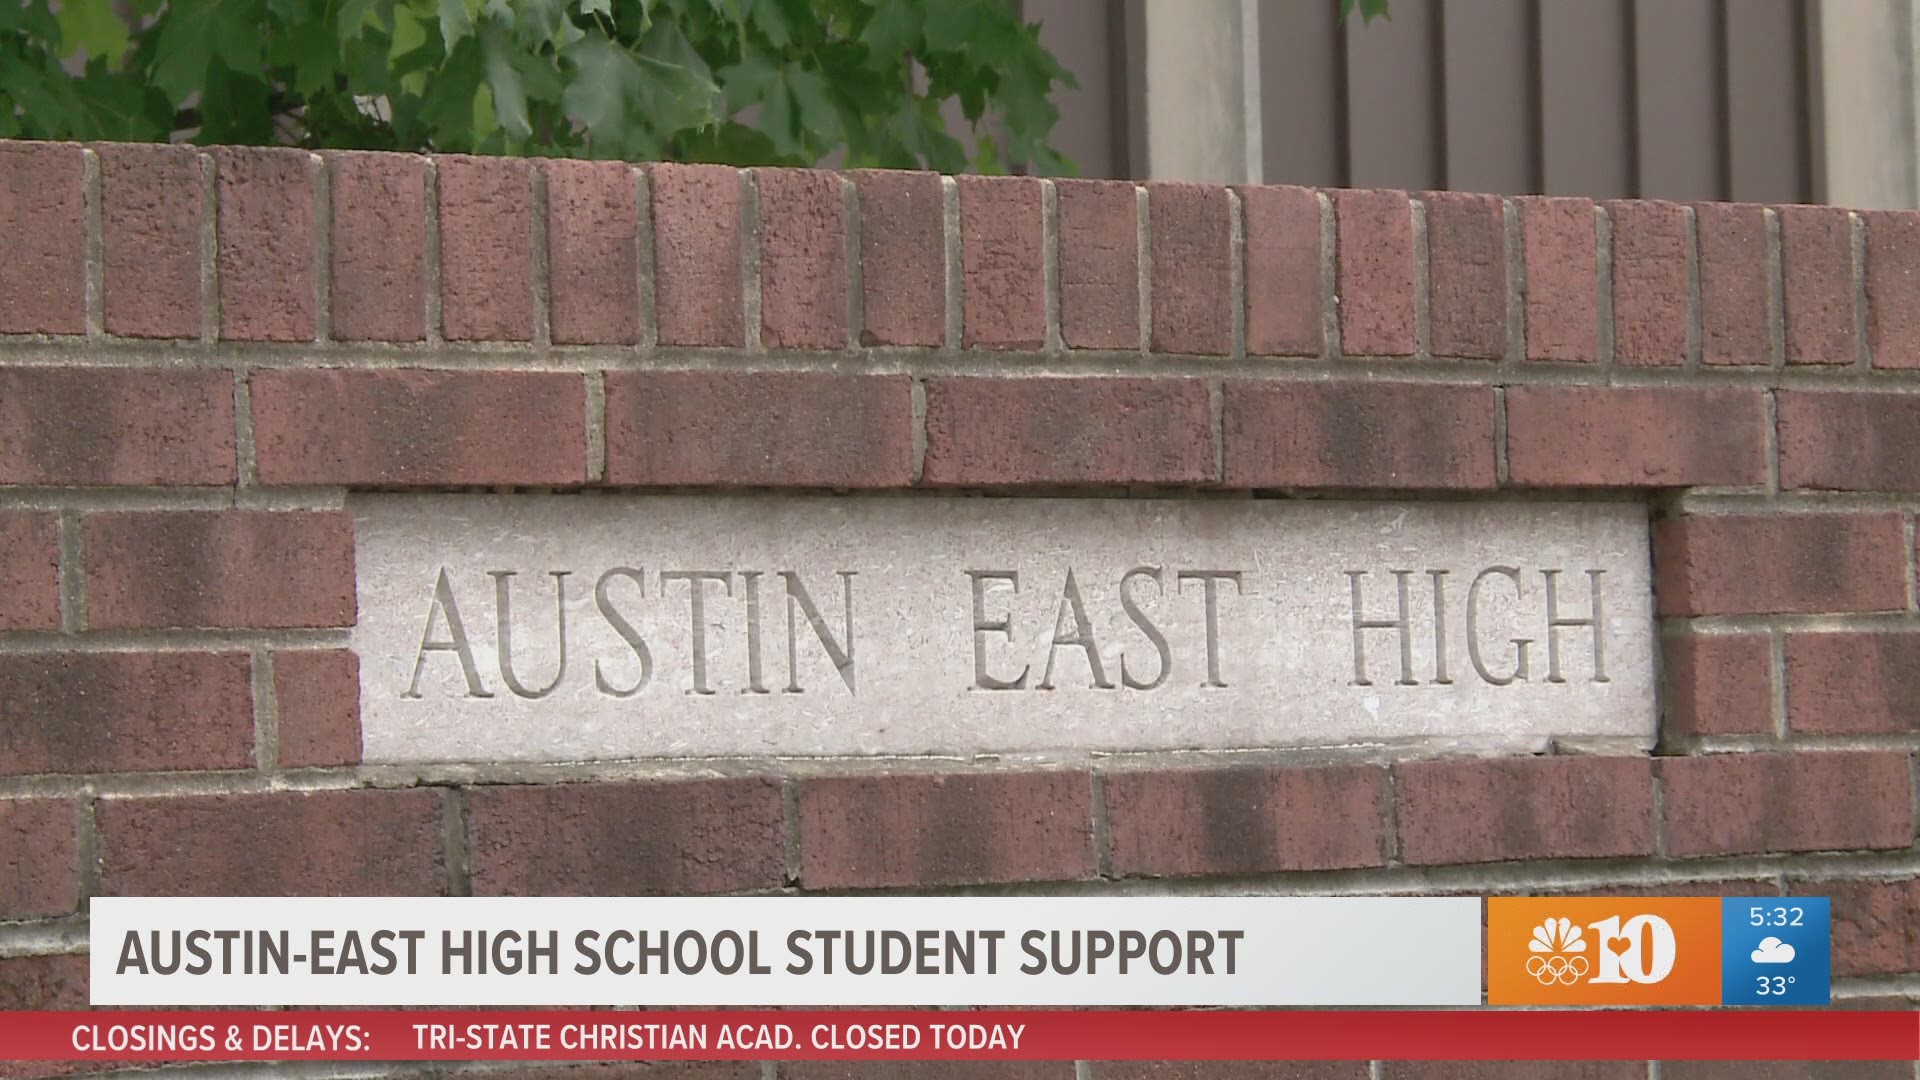 Multiple counselors are available to students at Austin East either in-person at the school or virtually.